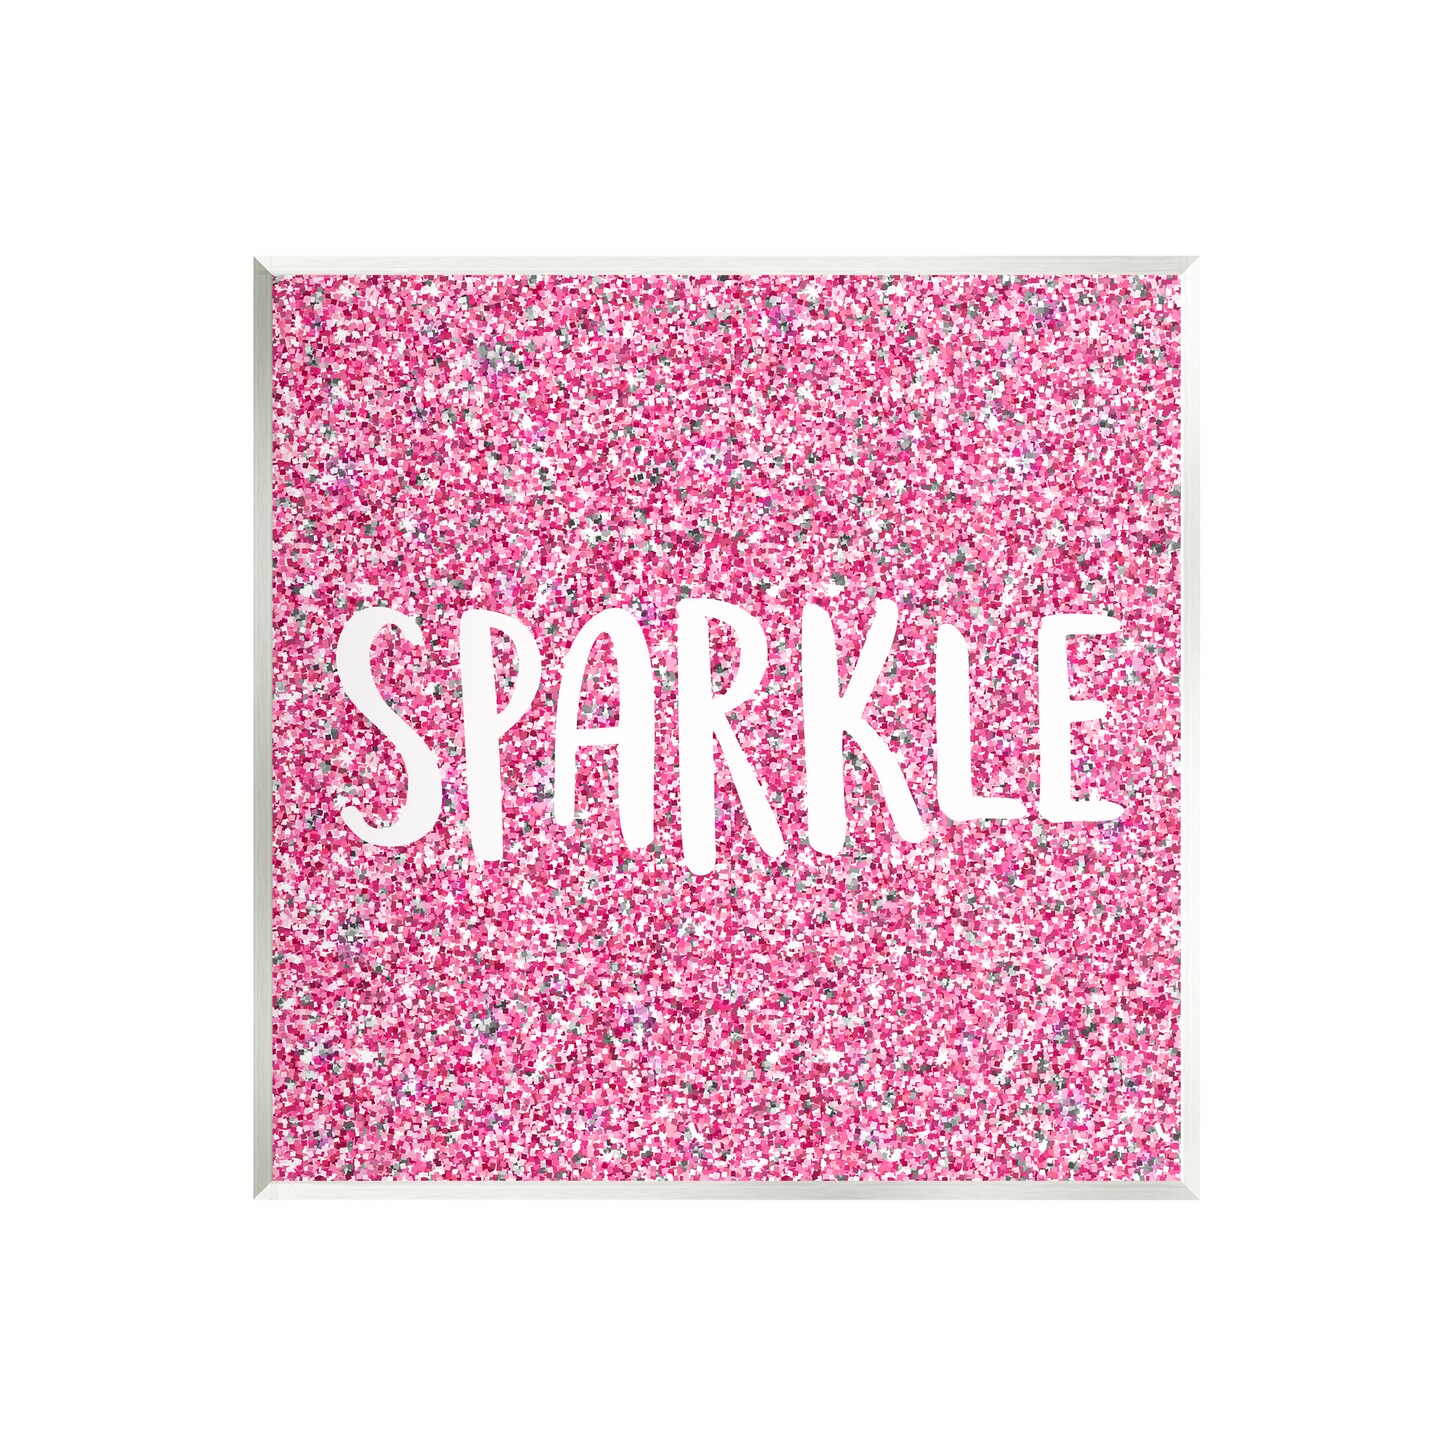 Stupell Industries Glam Pink Sparkle Pattern Phrase Wall Plaque Art